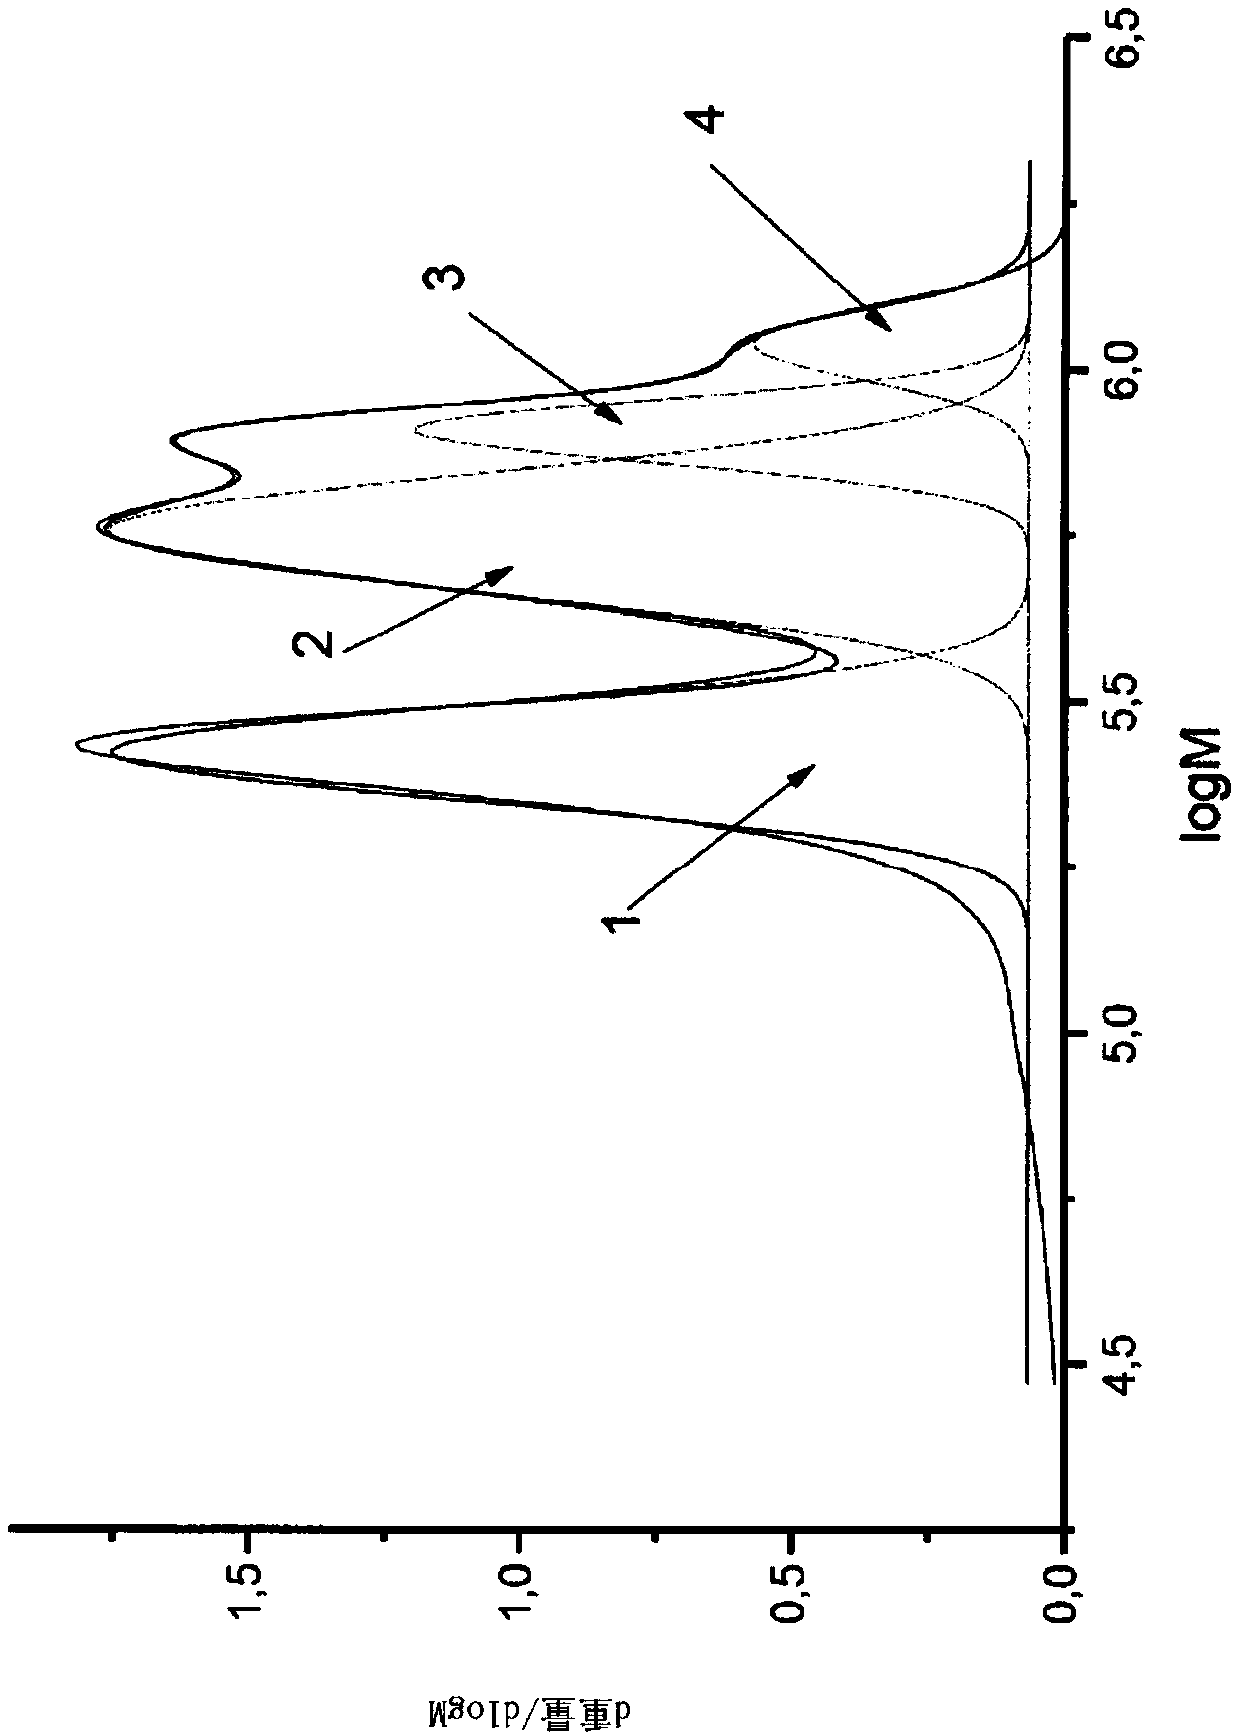 A method for producing branched modified rubber and a rubber composition comprising branched modified rubber prepared by the method, and use thereof